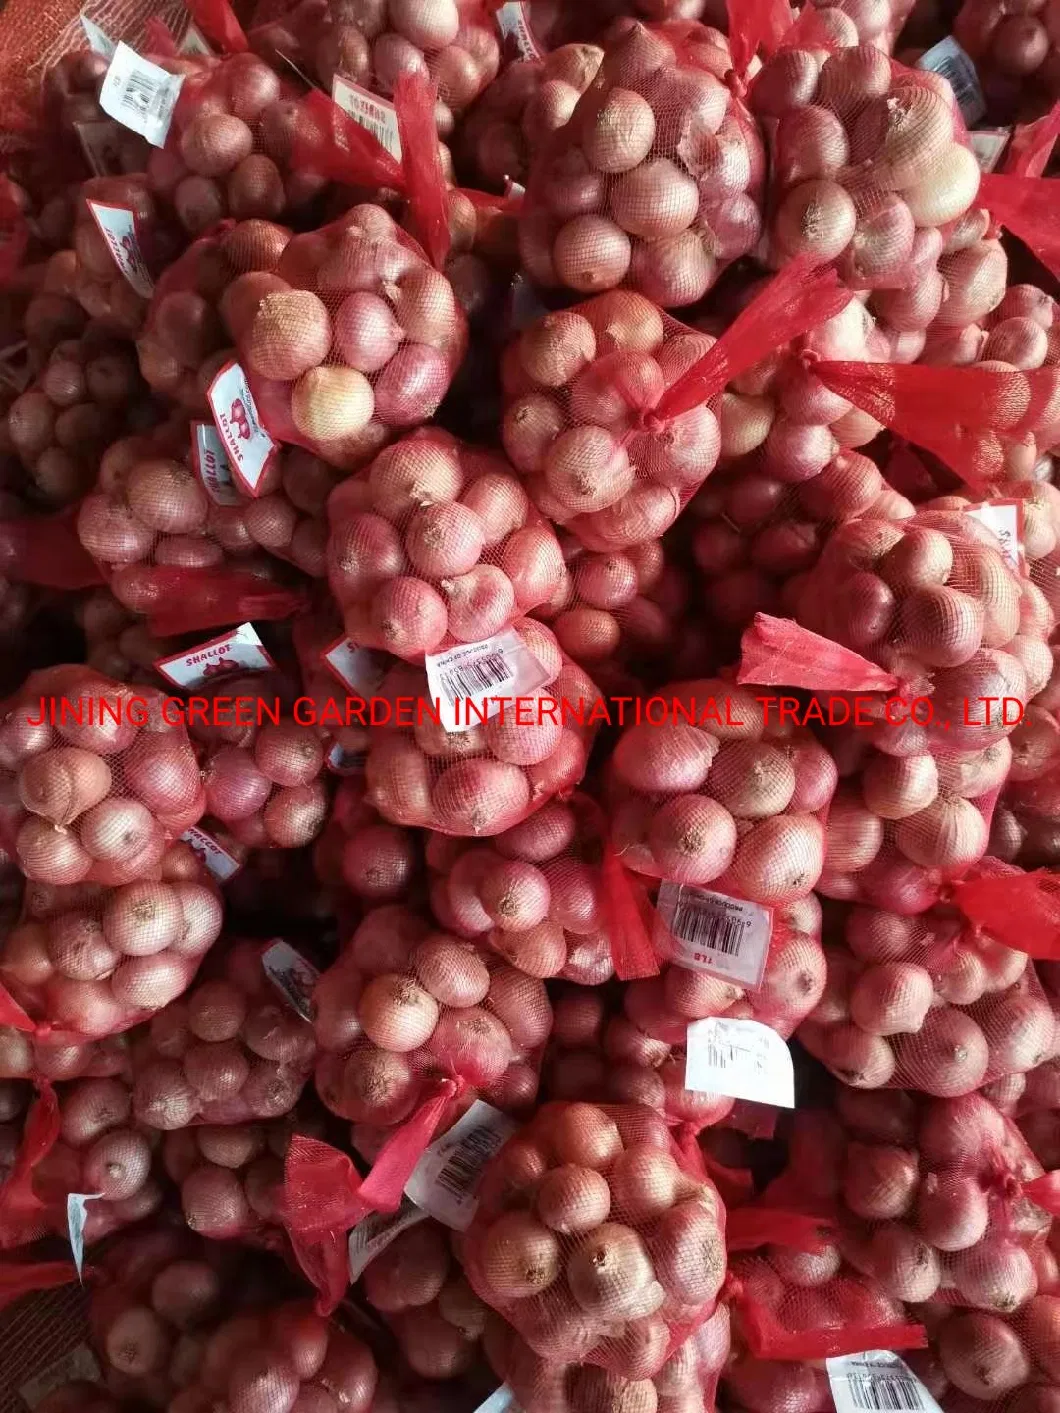 Whole Wholesale Red Yellow White Green Skin Crop Peeled Purple Organic Frozen Fresh Vegetable Onion Price From Factory Supplier